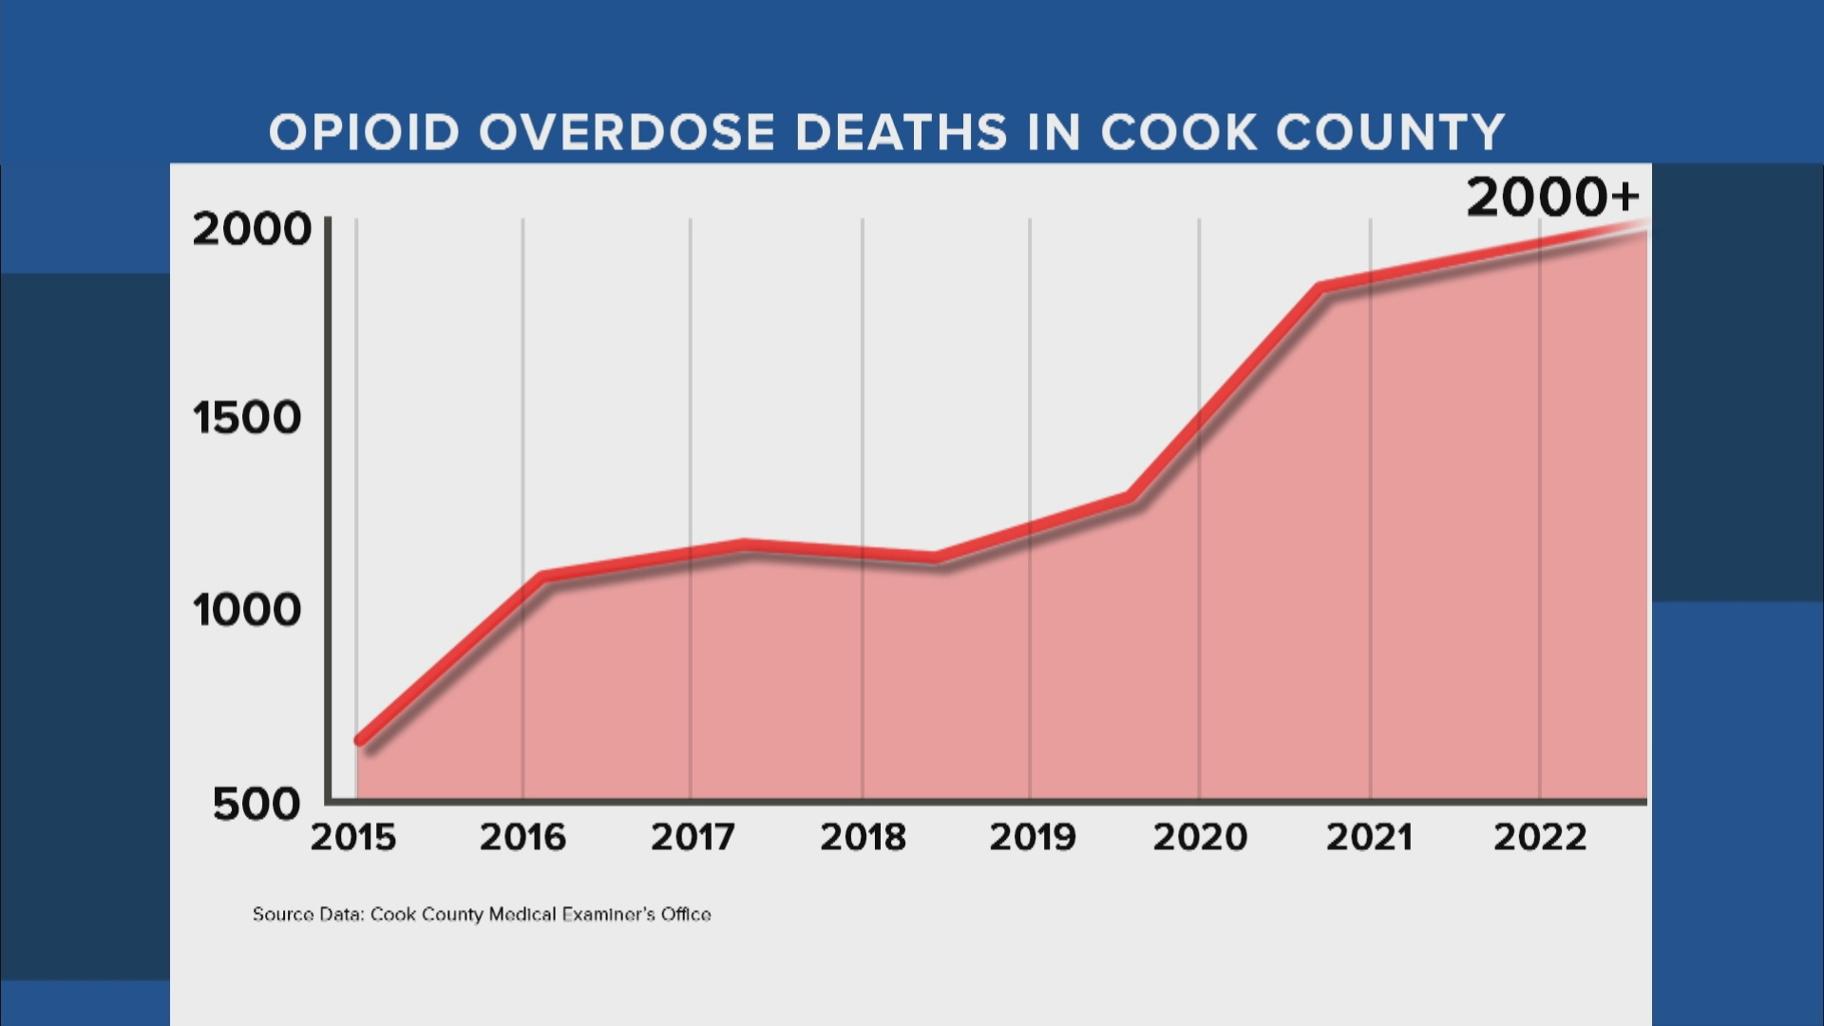 The Cook County Medical Examiner's Office says it expects the toll from opioid overdoses to exceed 2,000 deaths in 2022 once all autopsies for the year have been completed. (WTTW News)